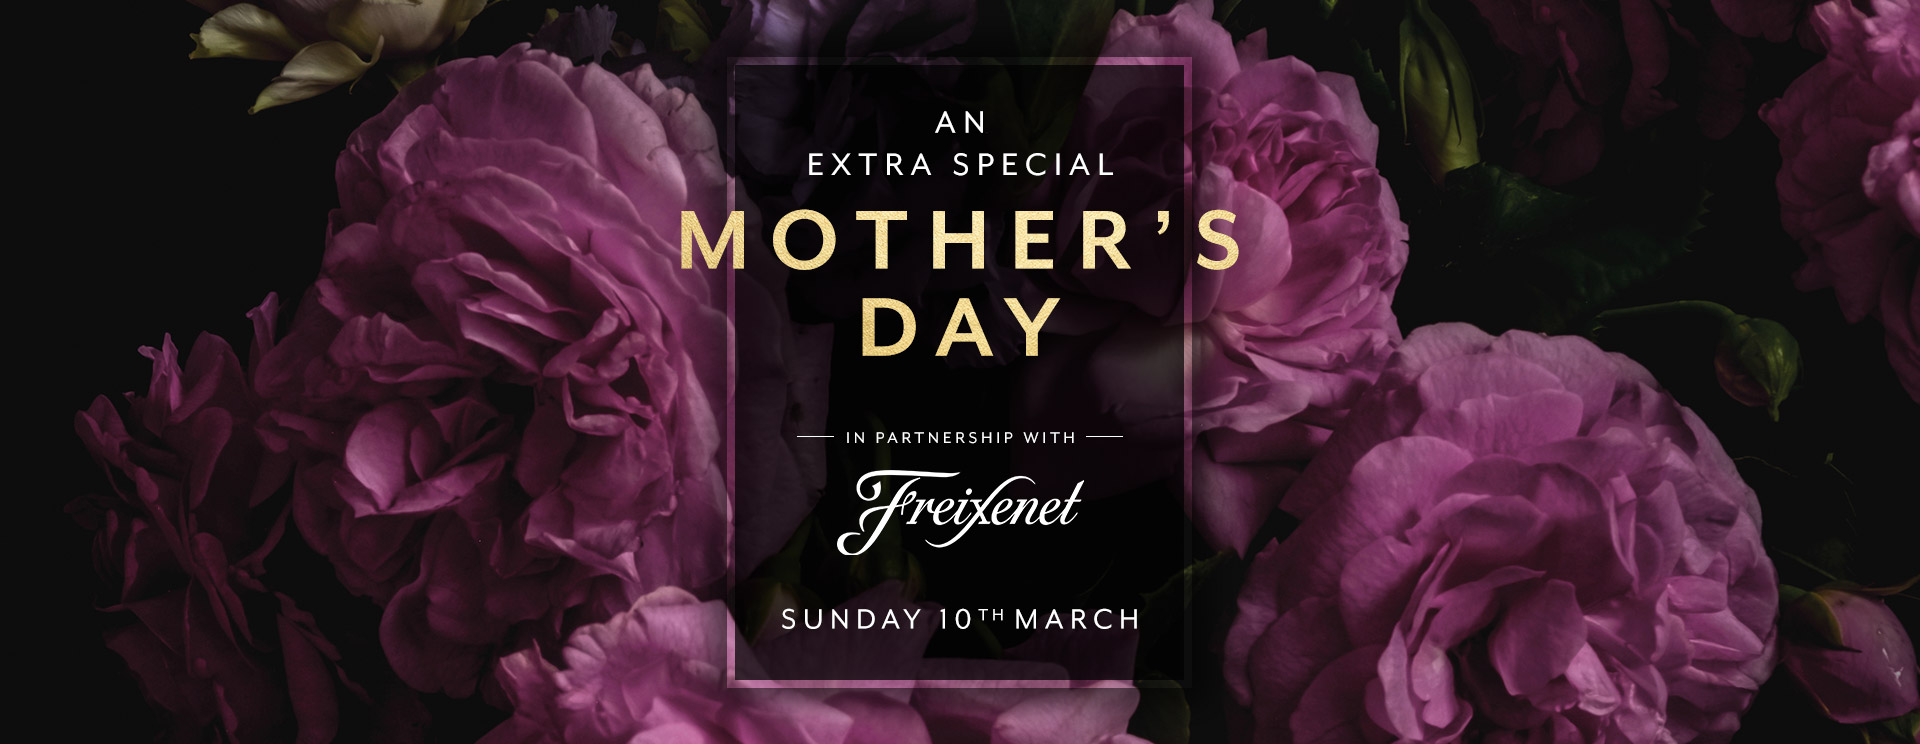 Mother’s Day menu/meal in London